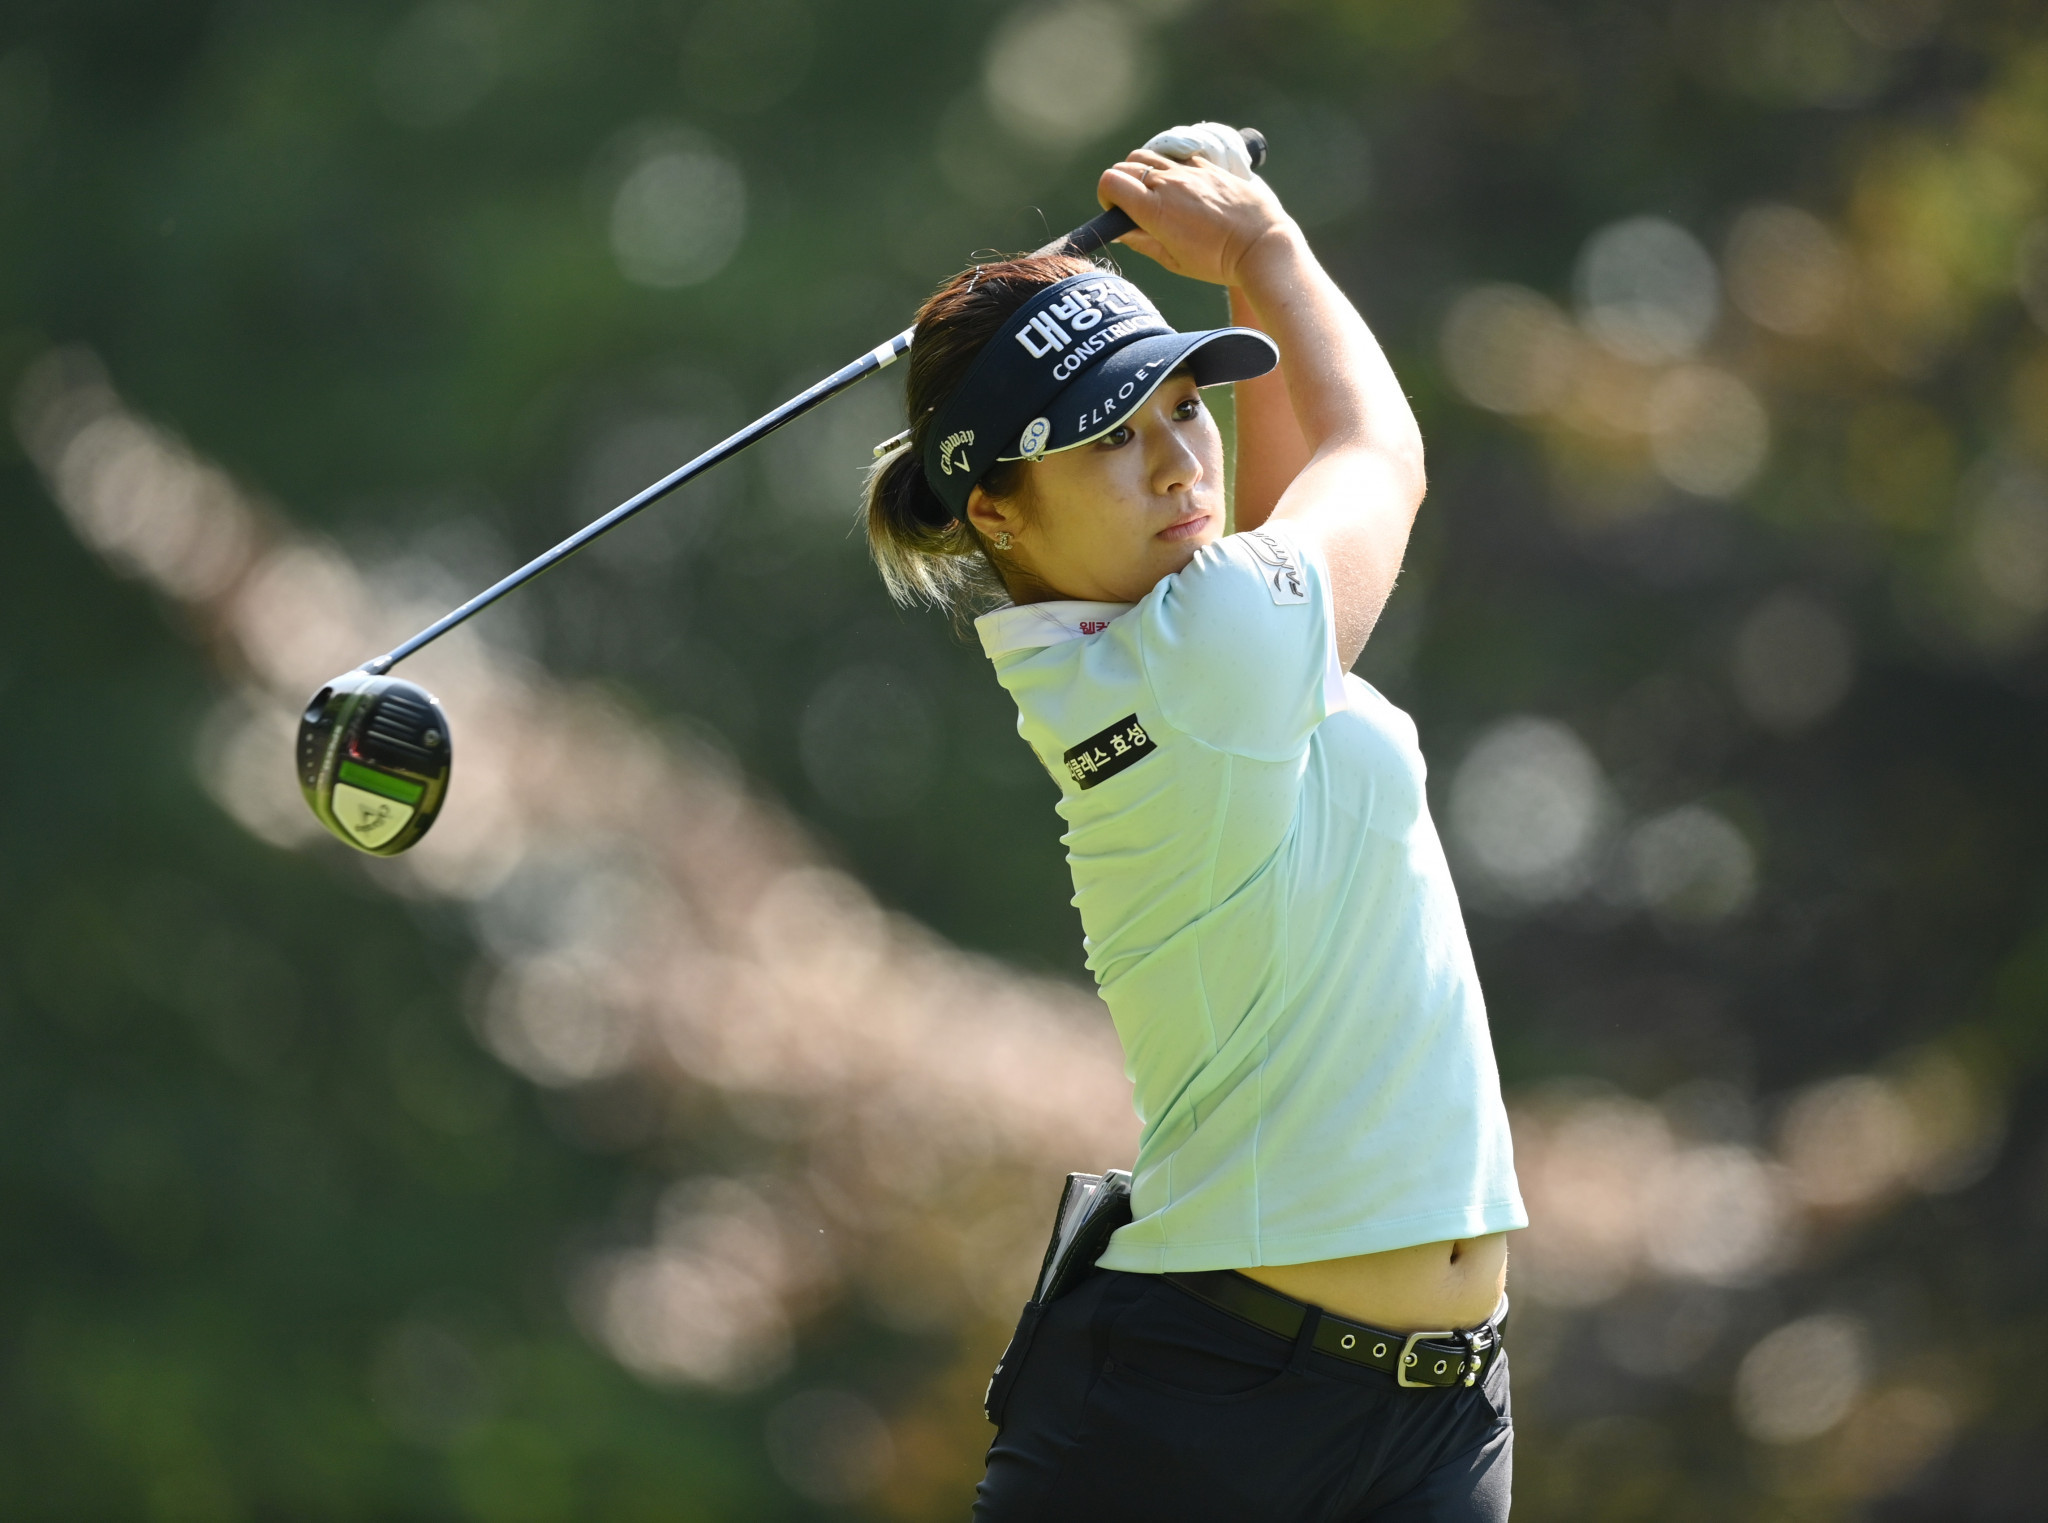 Lee6 Jeong-eun leads the Evian Championship by three shots after a record equalling round of 61 ©Getty Images